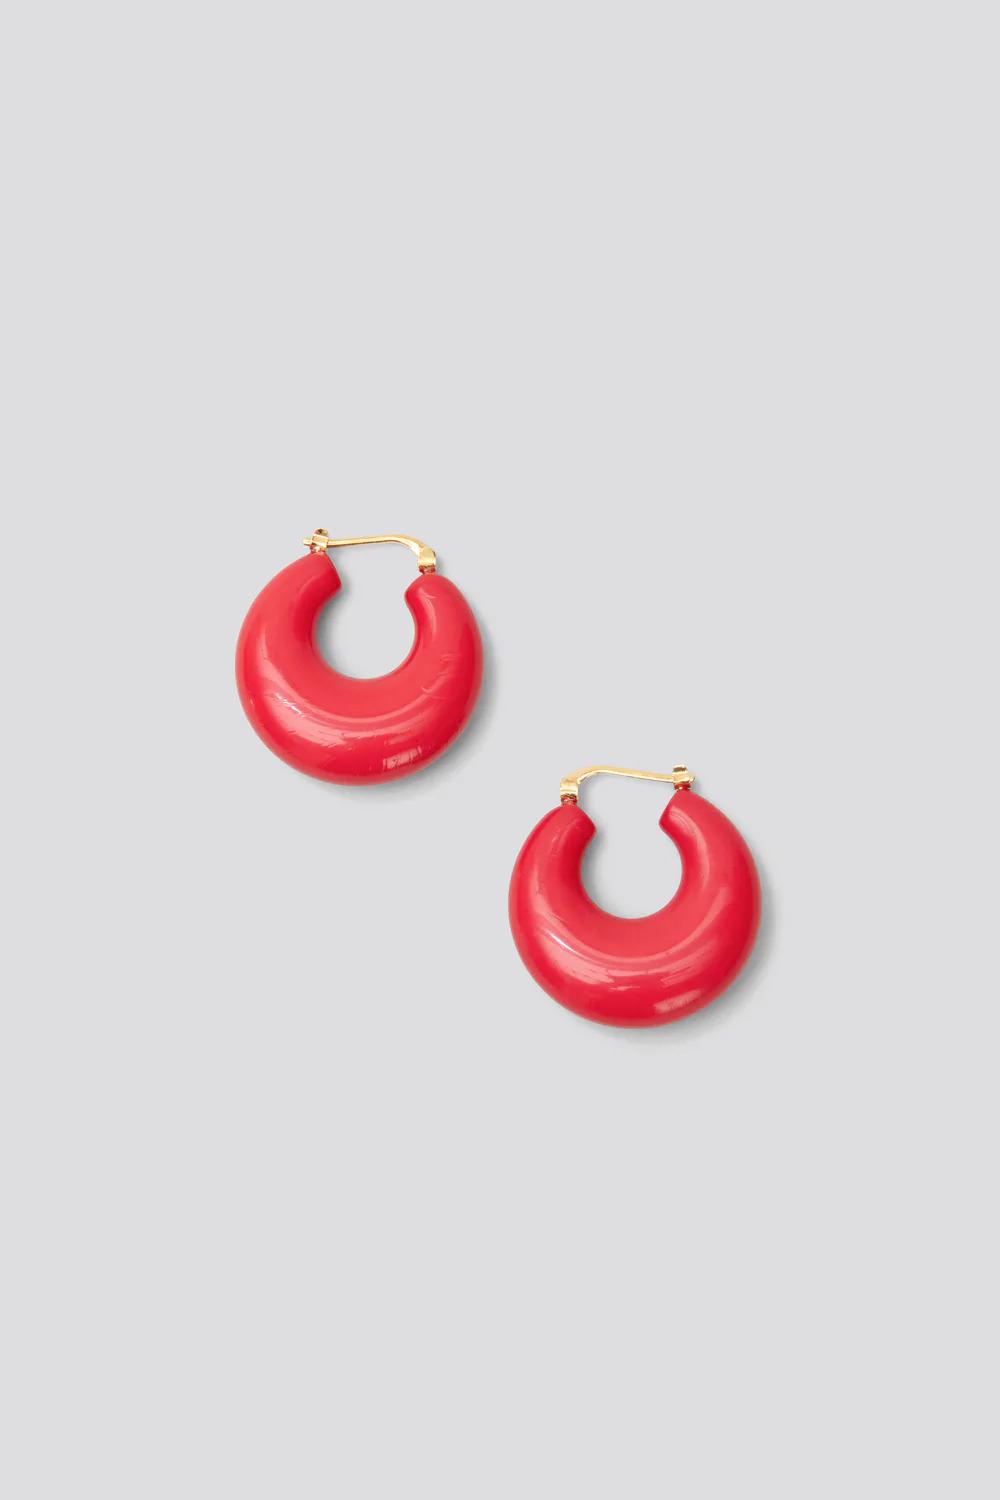 Product Image for Grass Earrings, Cherry